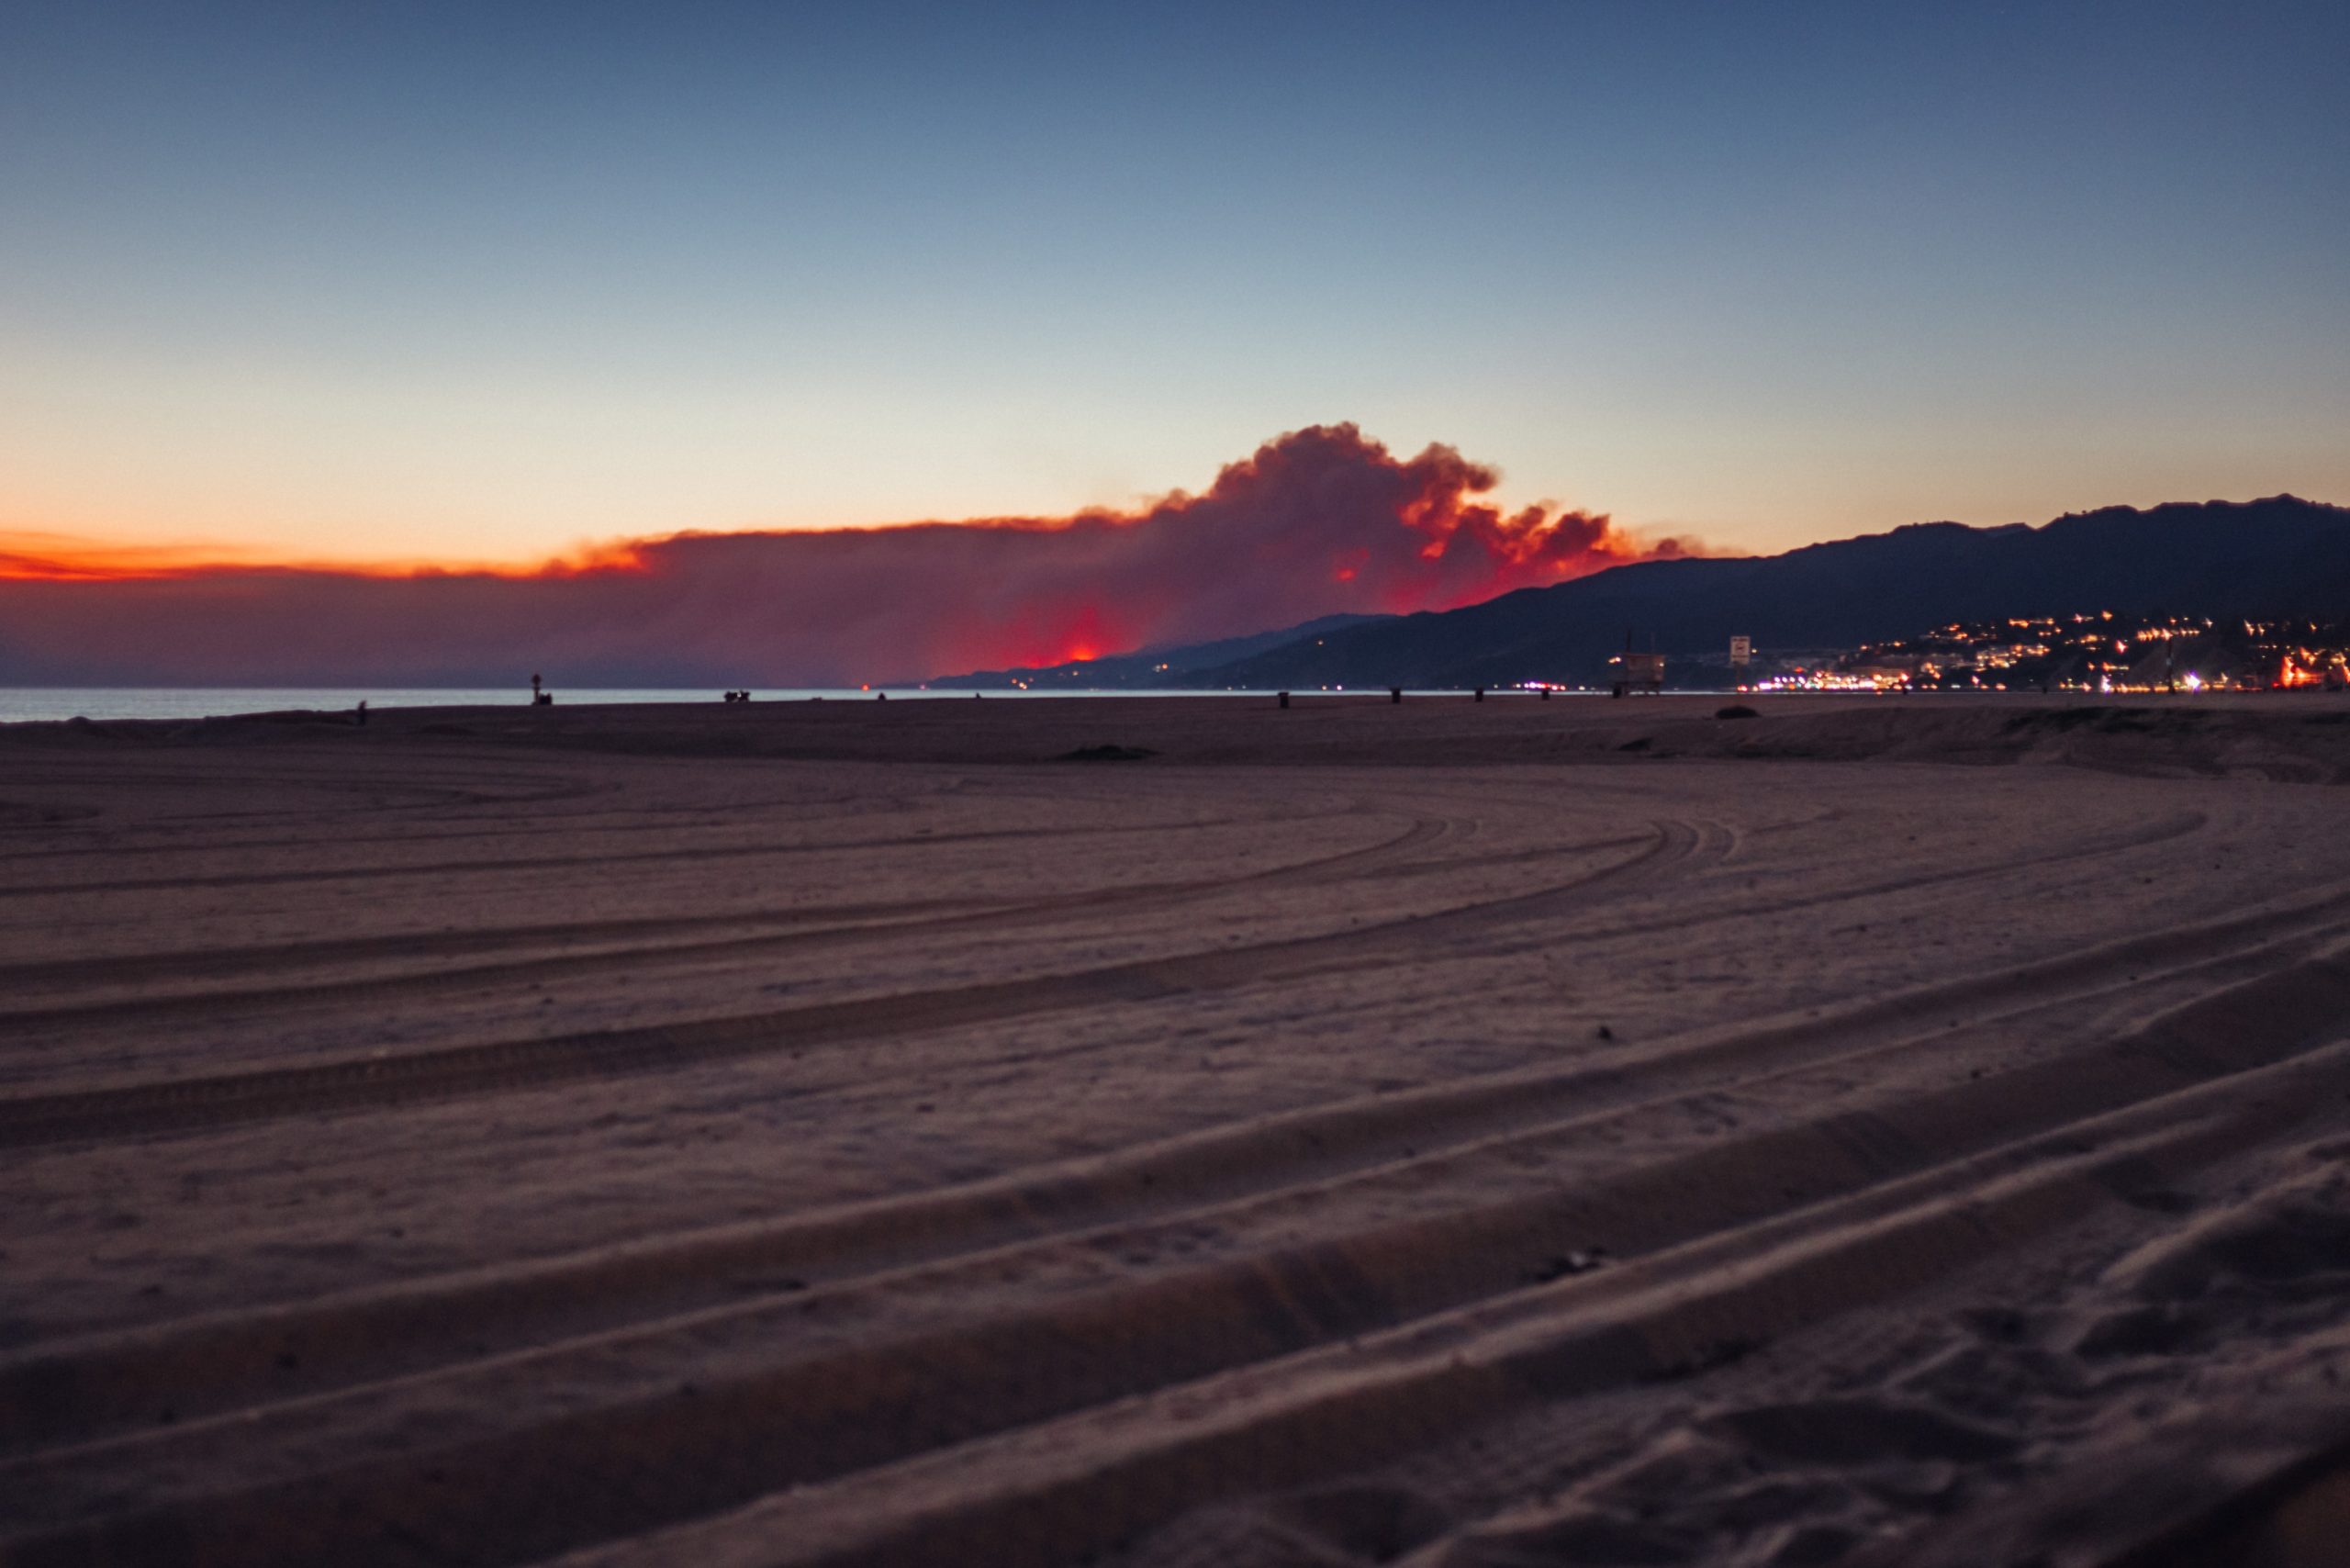 Wild Fires, Hurricanes and Global Warming - by Brooke Gilmore - The Ark Valley Voice